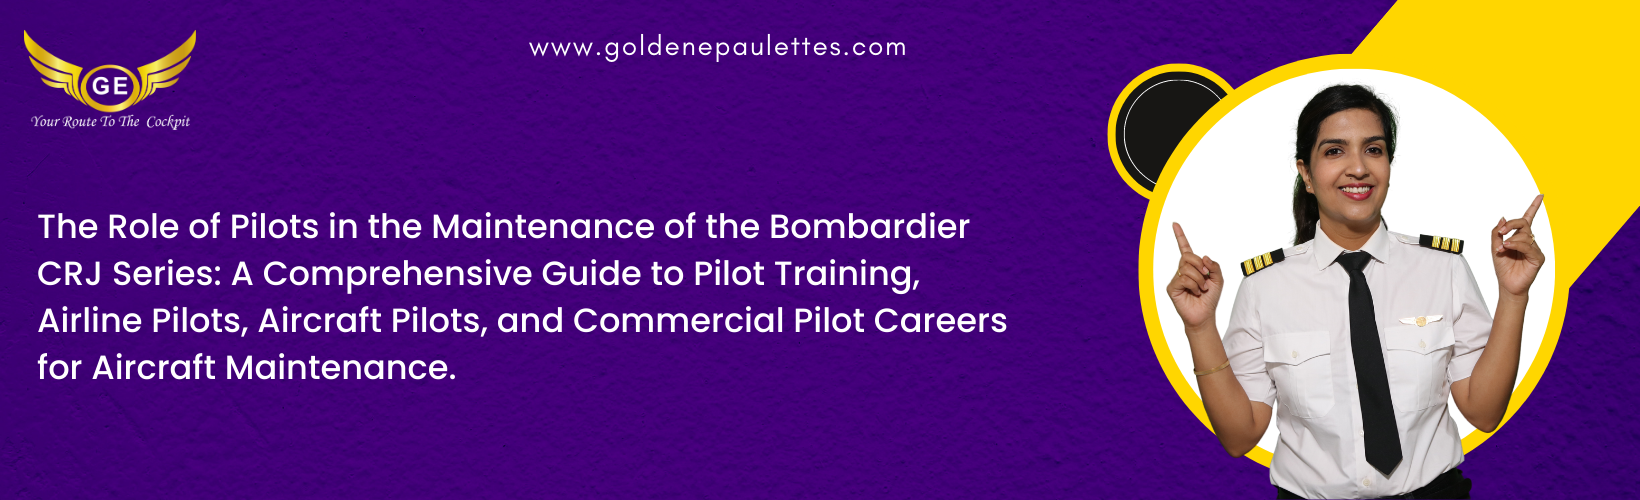 15.The Role of Pilots in the Maintenance of the Bombardier CRJ Series